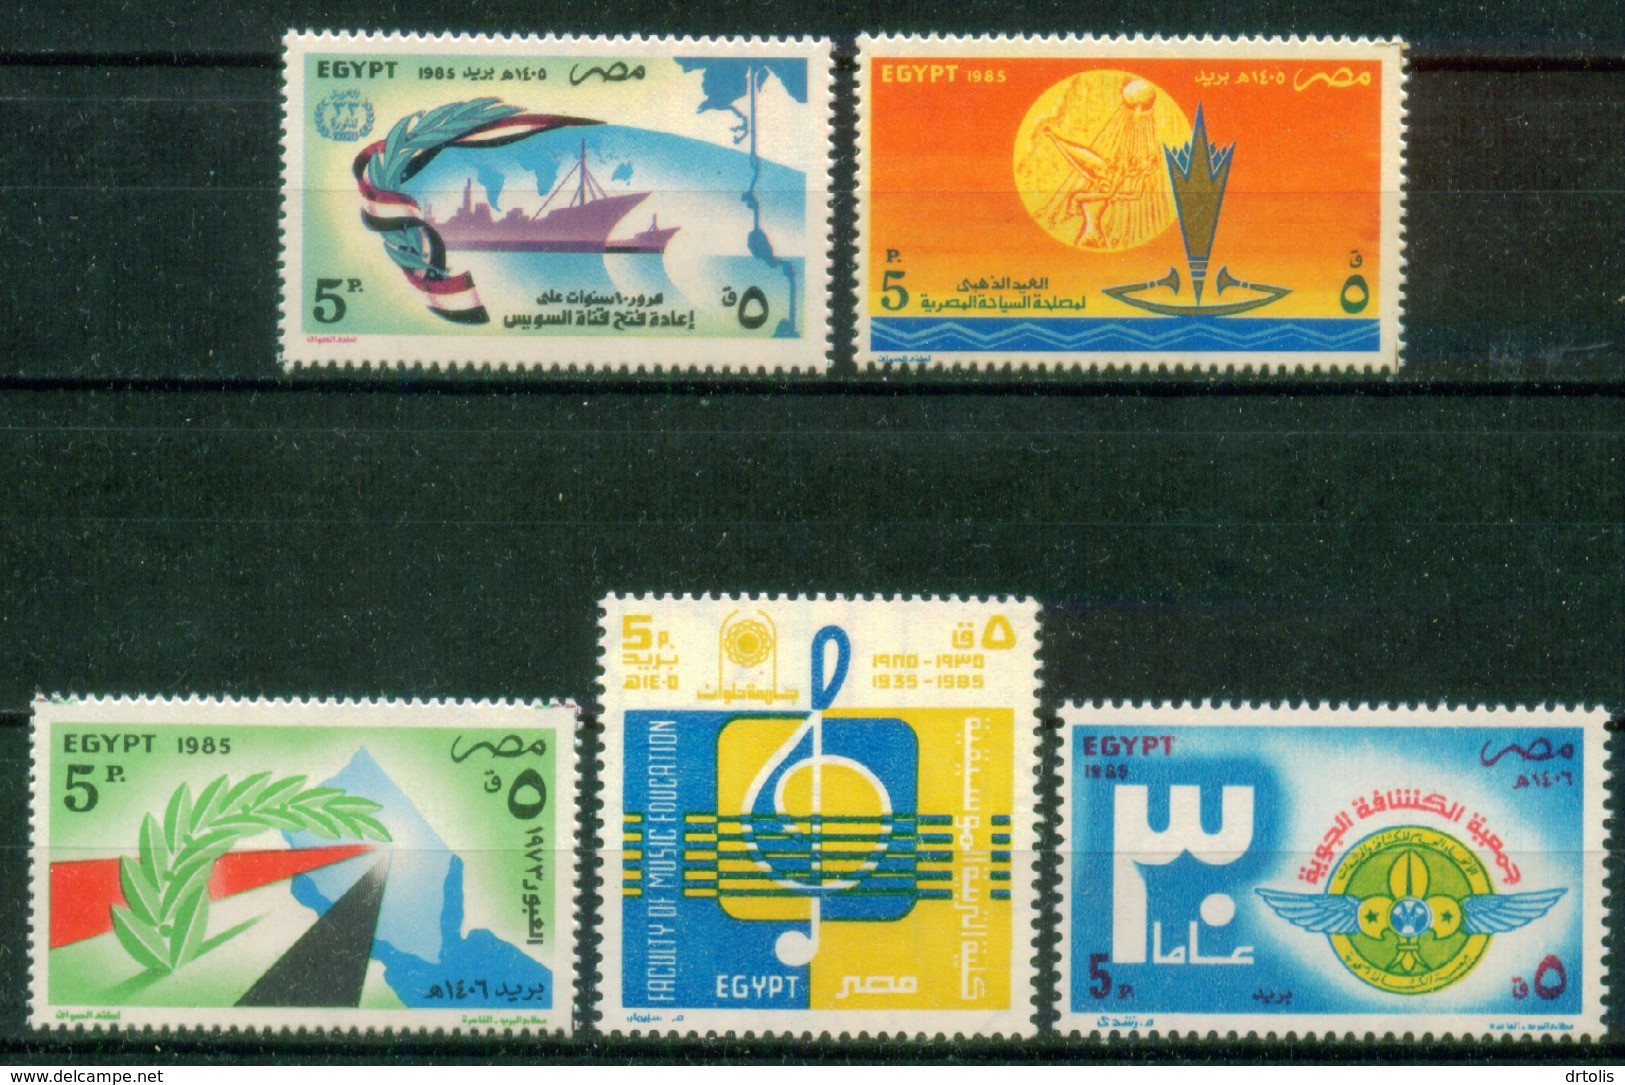 EGYPT / 1985 / COMPLETE YEAR ISSUES / MNH / VF - Ungebraucht